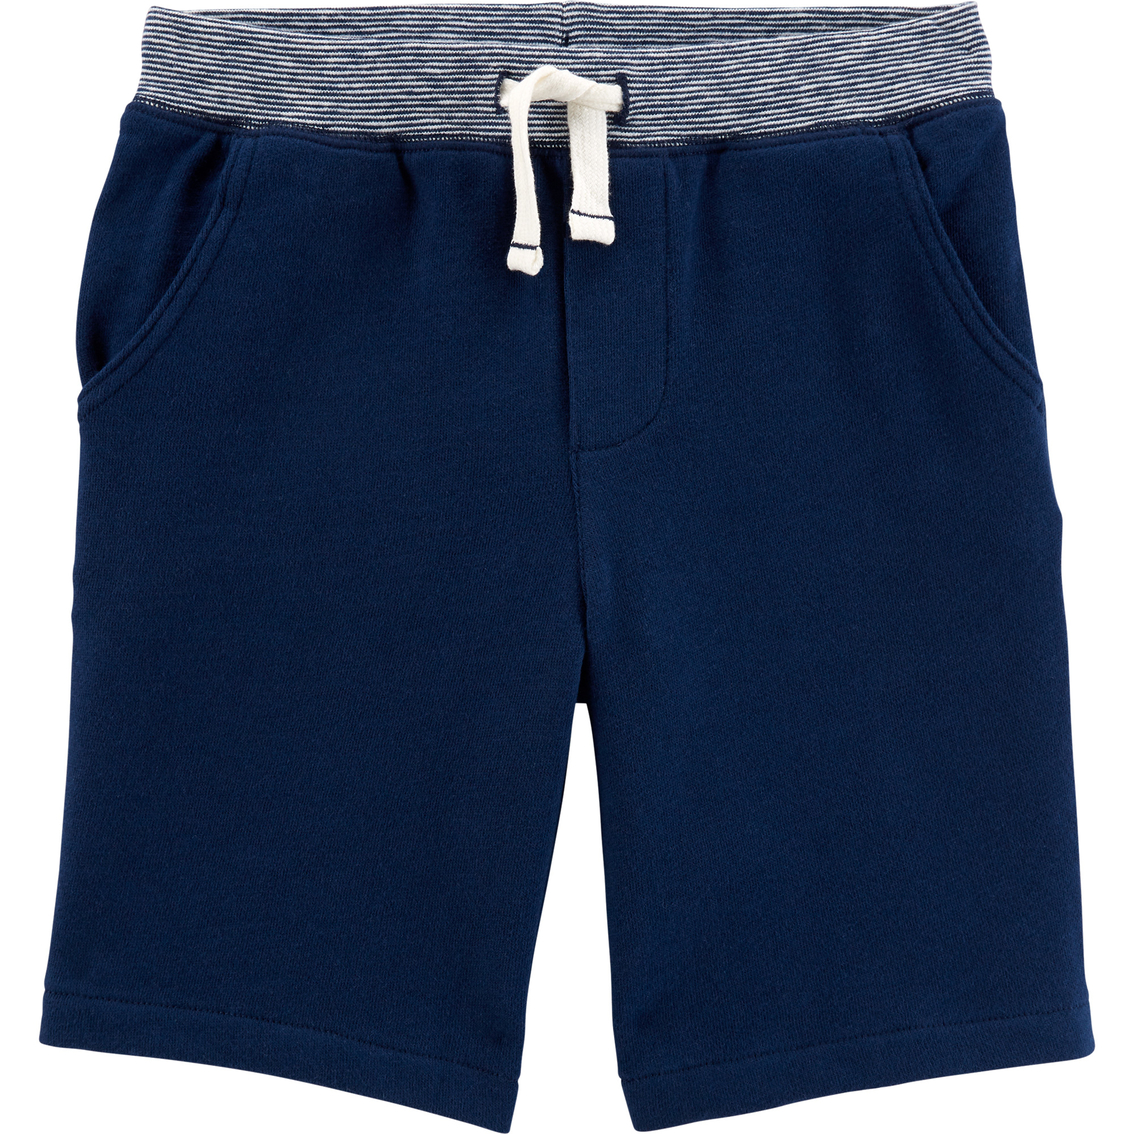 Carter's Little Boys Knit Shorts | Boys 4-7x | Clothing | Shop The Exchange